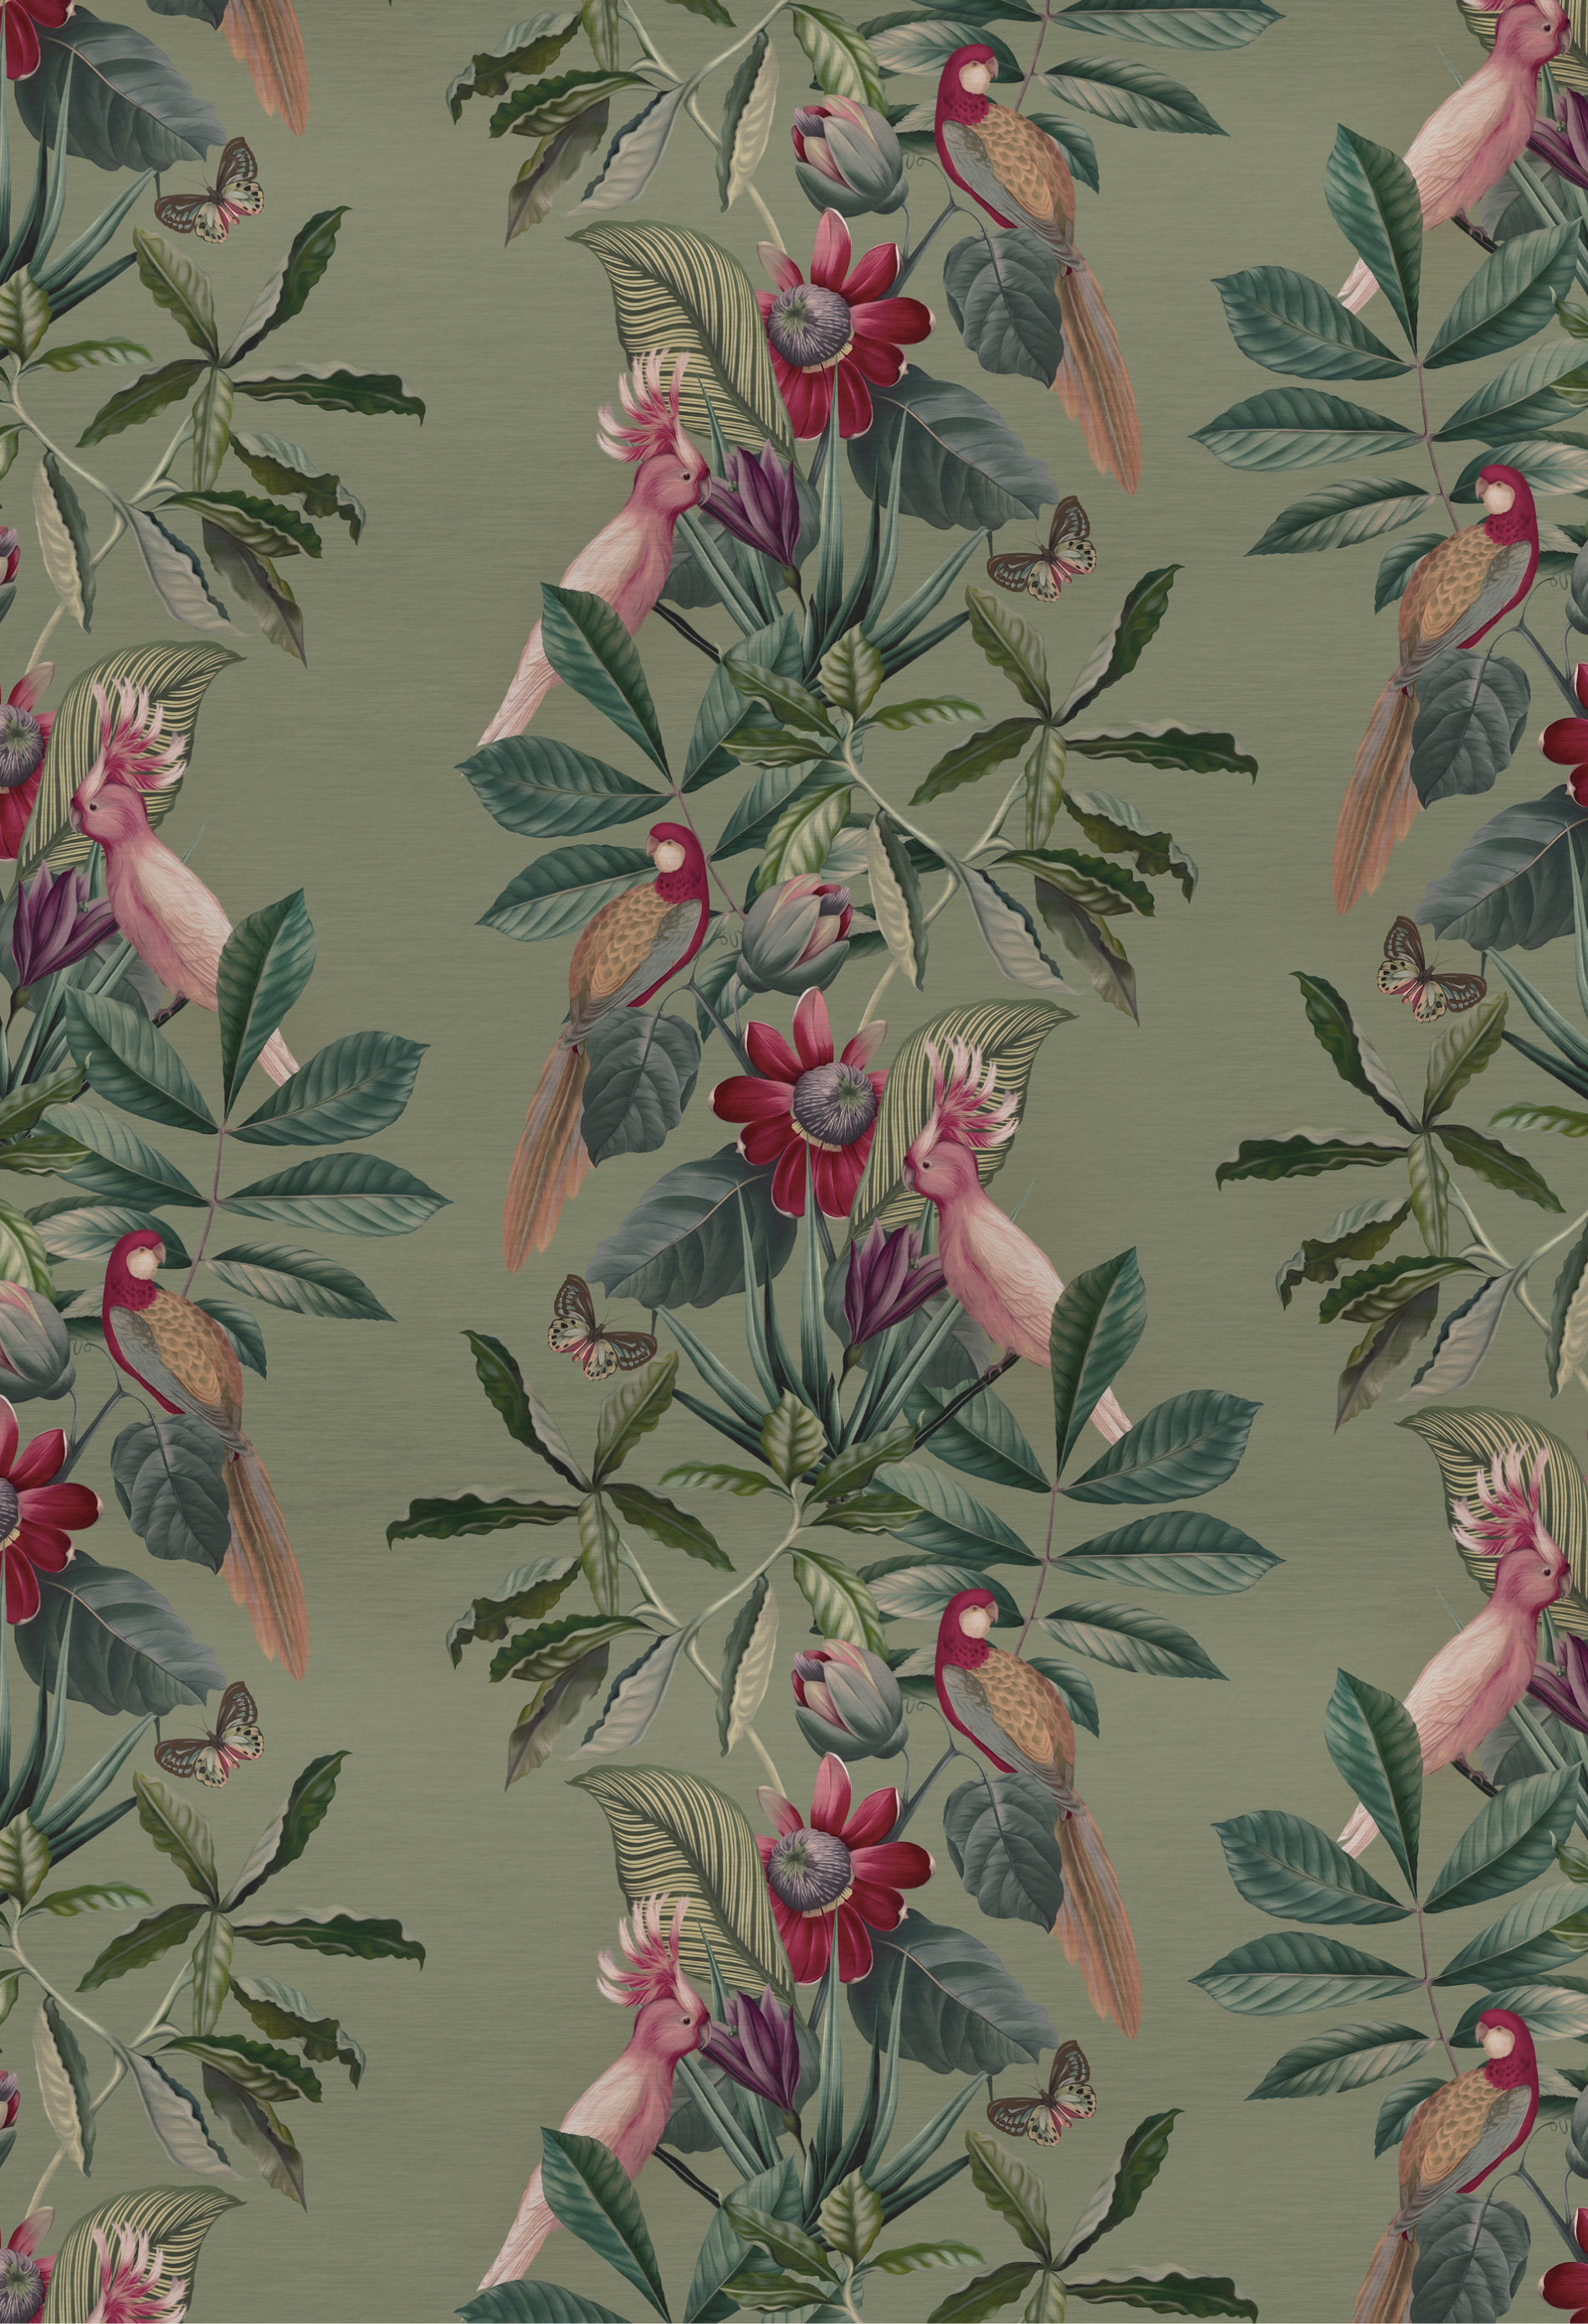 Tropical fauna and flora design of birds, flowers and leaves on green background from Deus ex Gardenia of Passiflora wallpaper in sage.